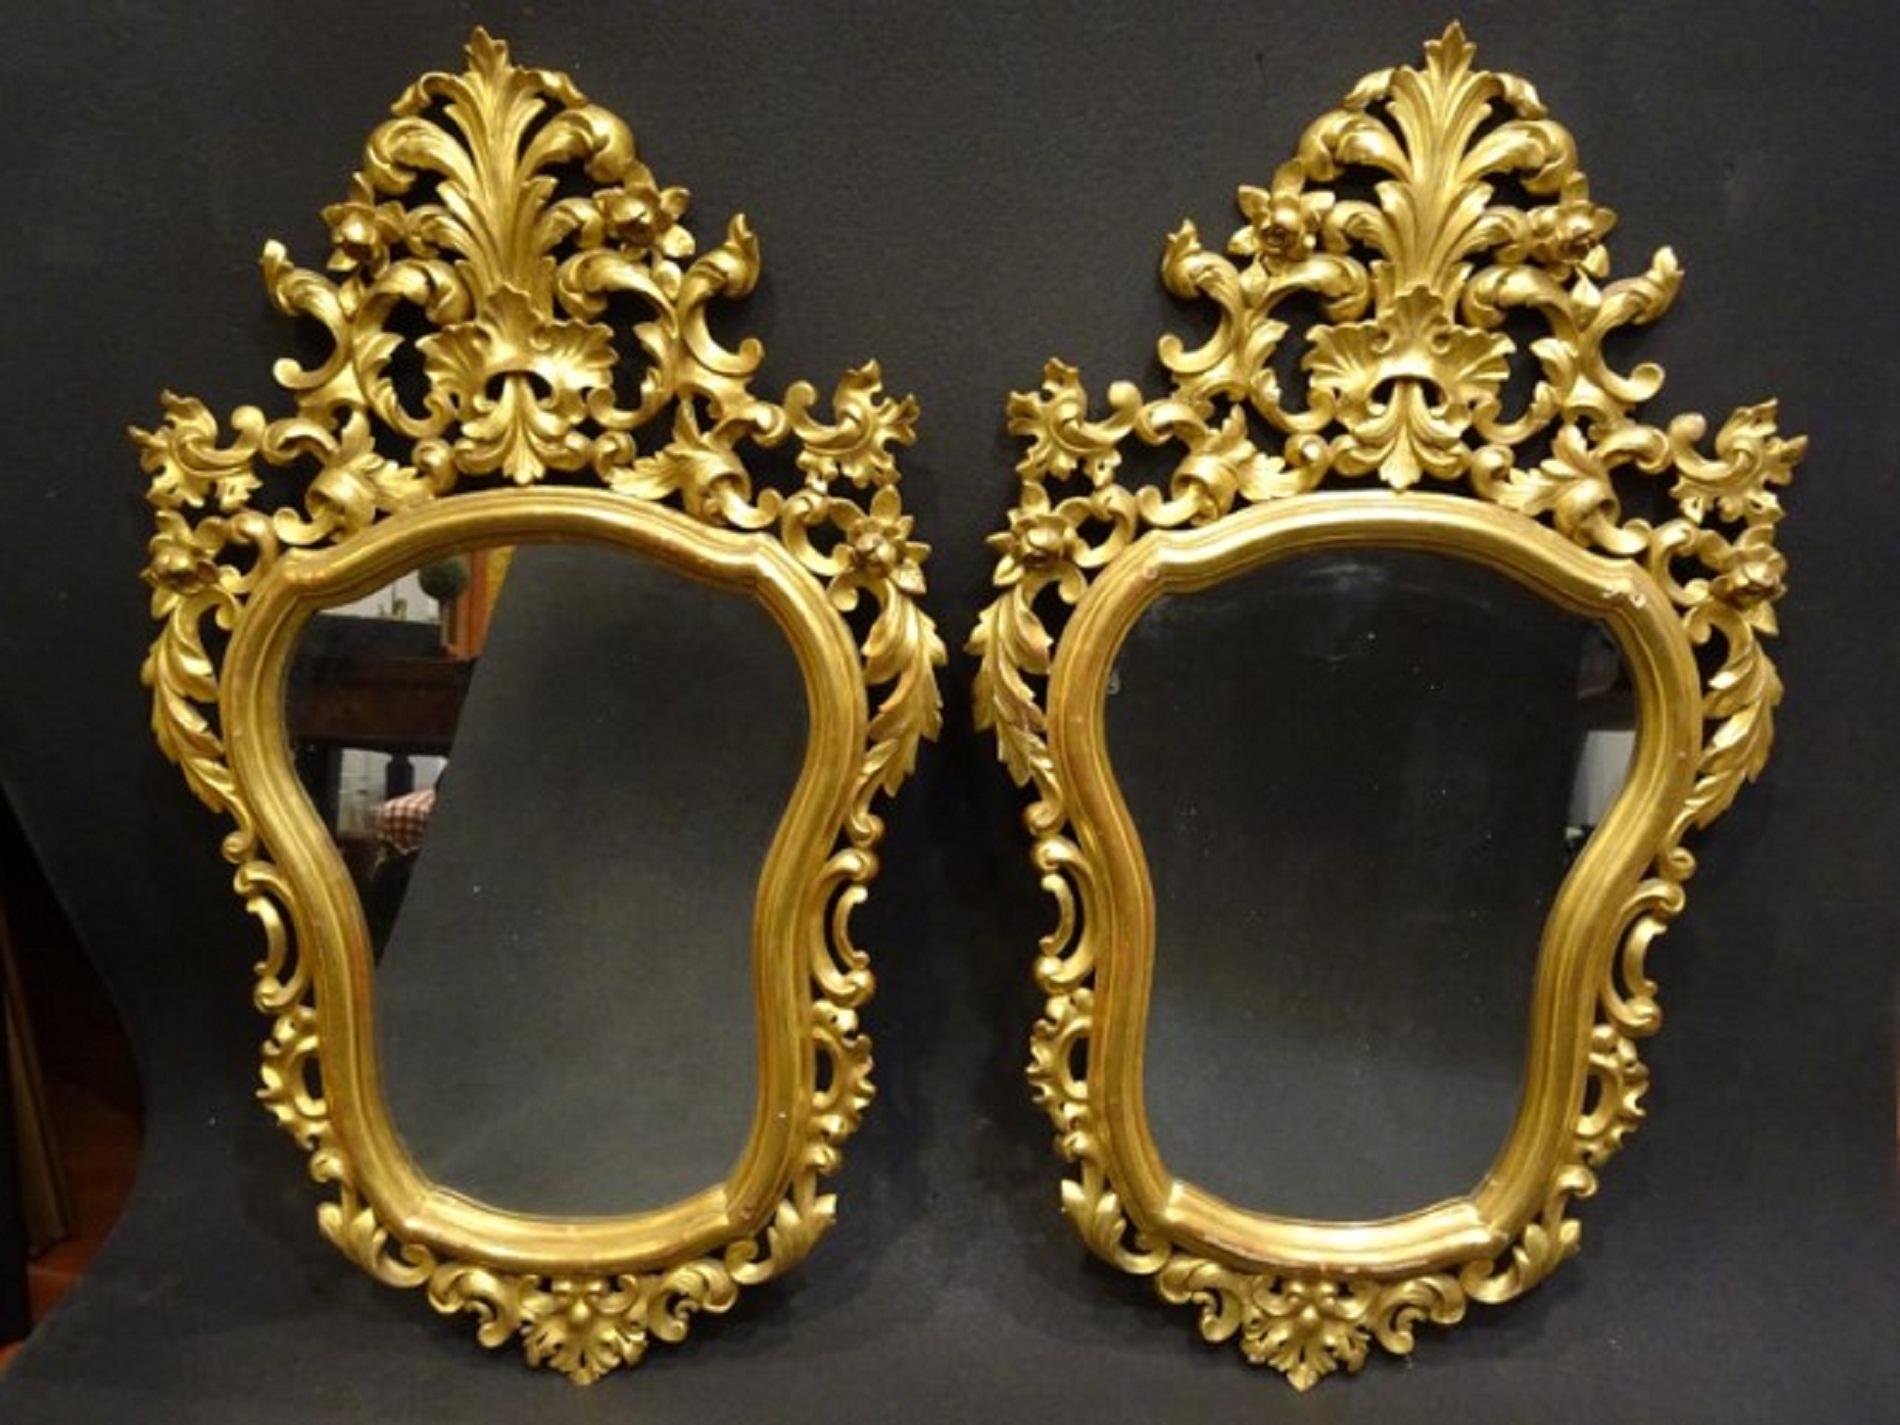 Stunning couple of 19th century Spanish carved and gilded wood wall mirrors.
They have a floral cut and rolls, the wood is gilded with gold of 18-karat and burnished with agata stone.
They look gorgeous!!!!!! They are a very sought after pieces,